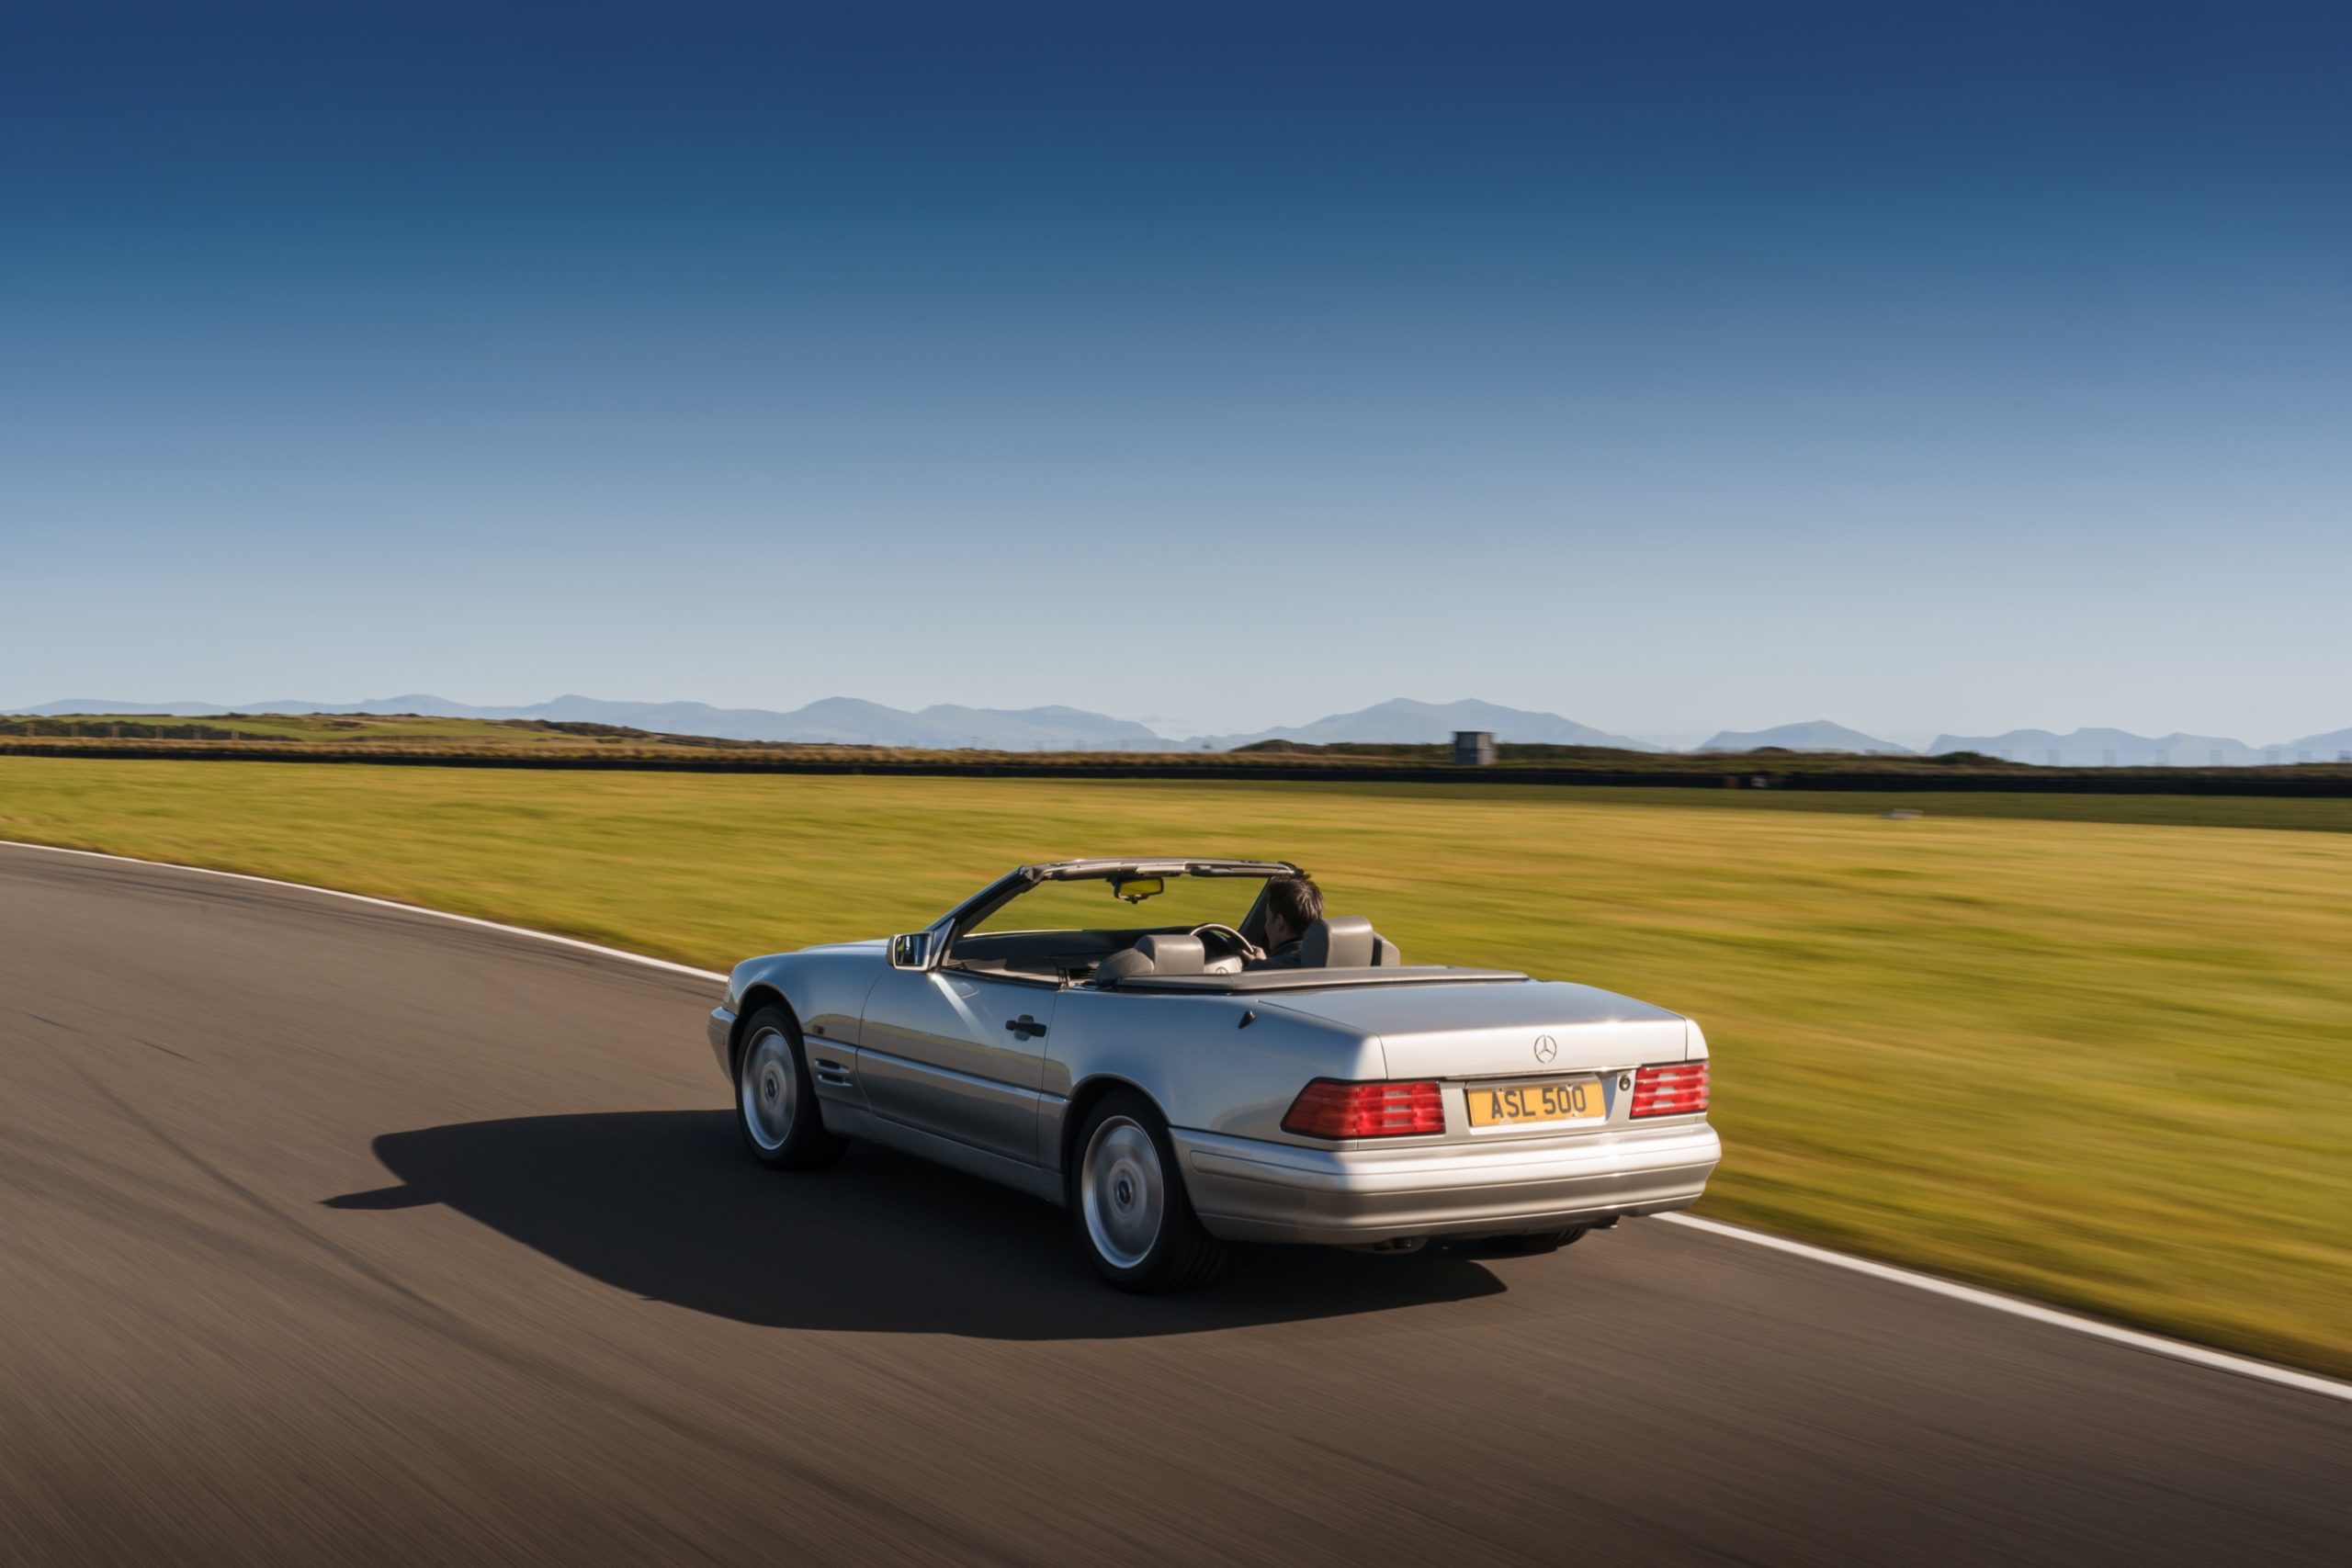 SL500 with the first 5-speed electronic transmission.